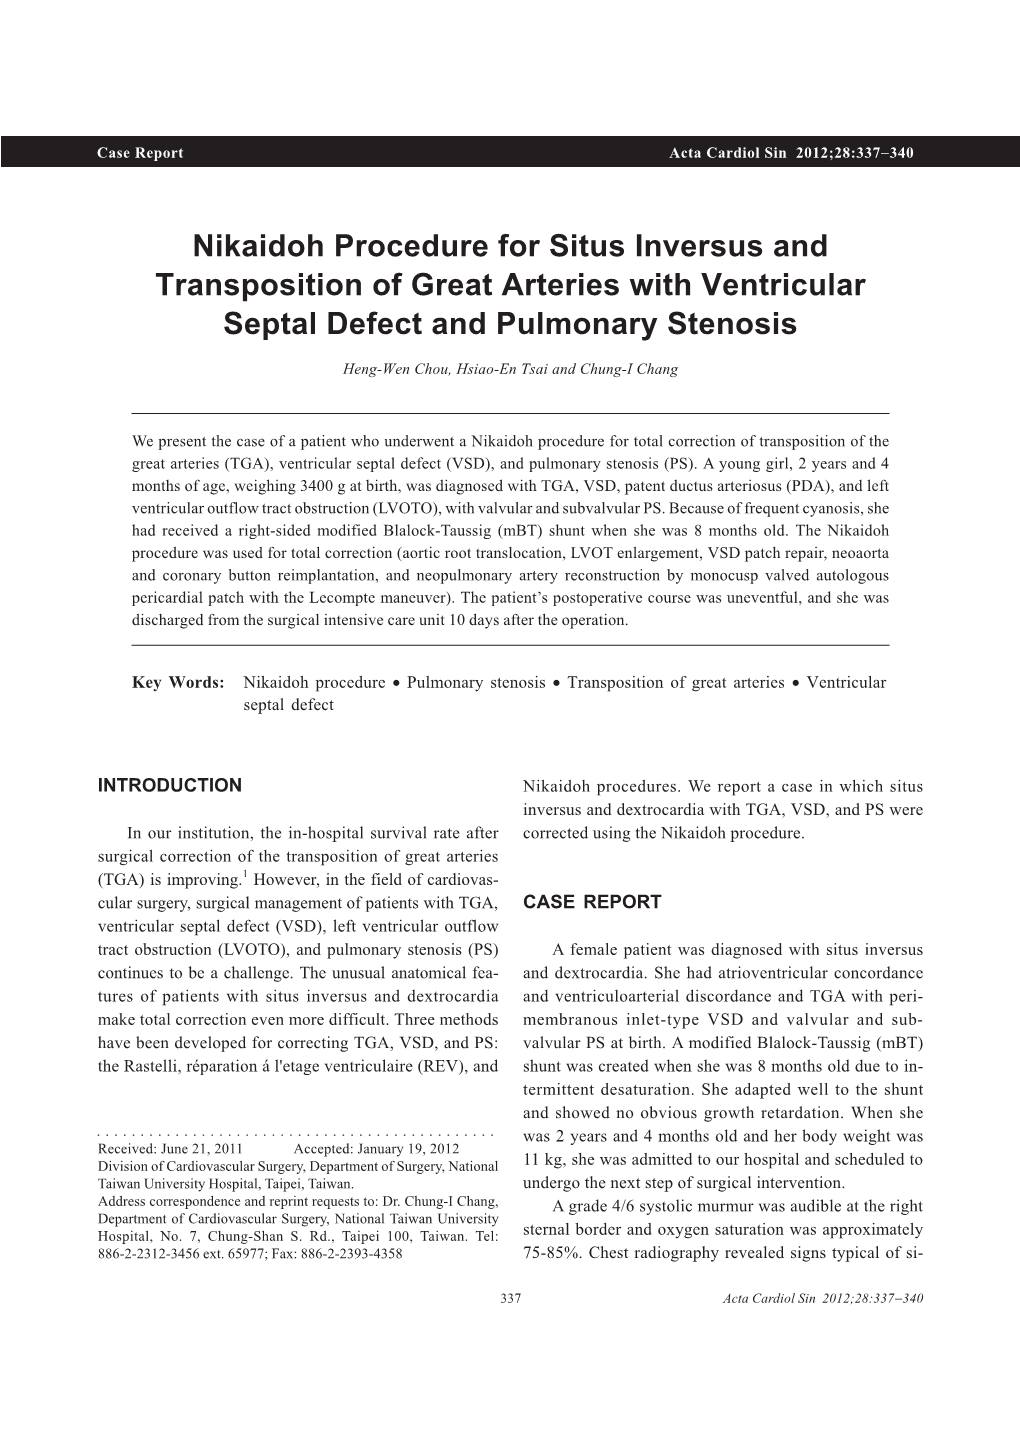 Nikaidoh Procedure for Situs Inversus and Transposition of Great Arteries with Ventricular Septal Defect and Pulmonary Stenosis